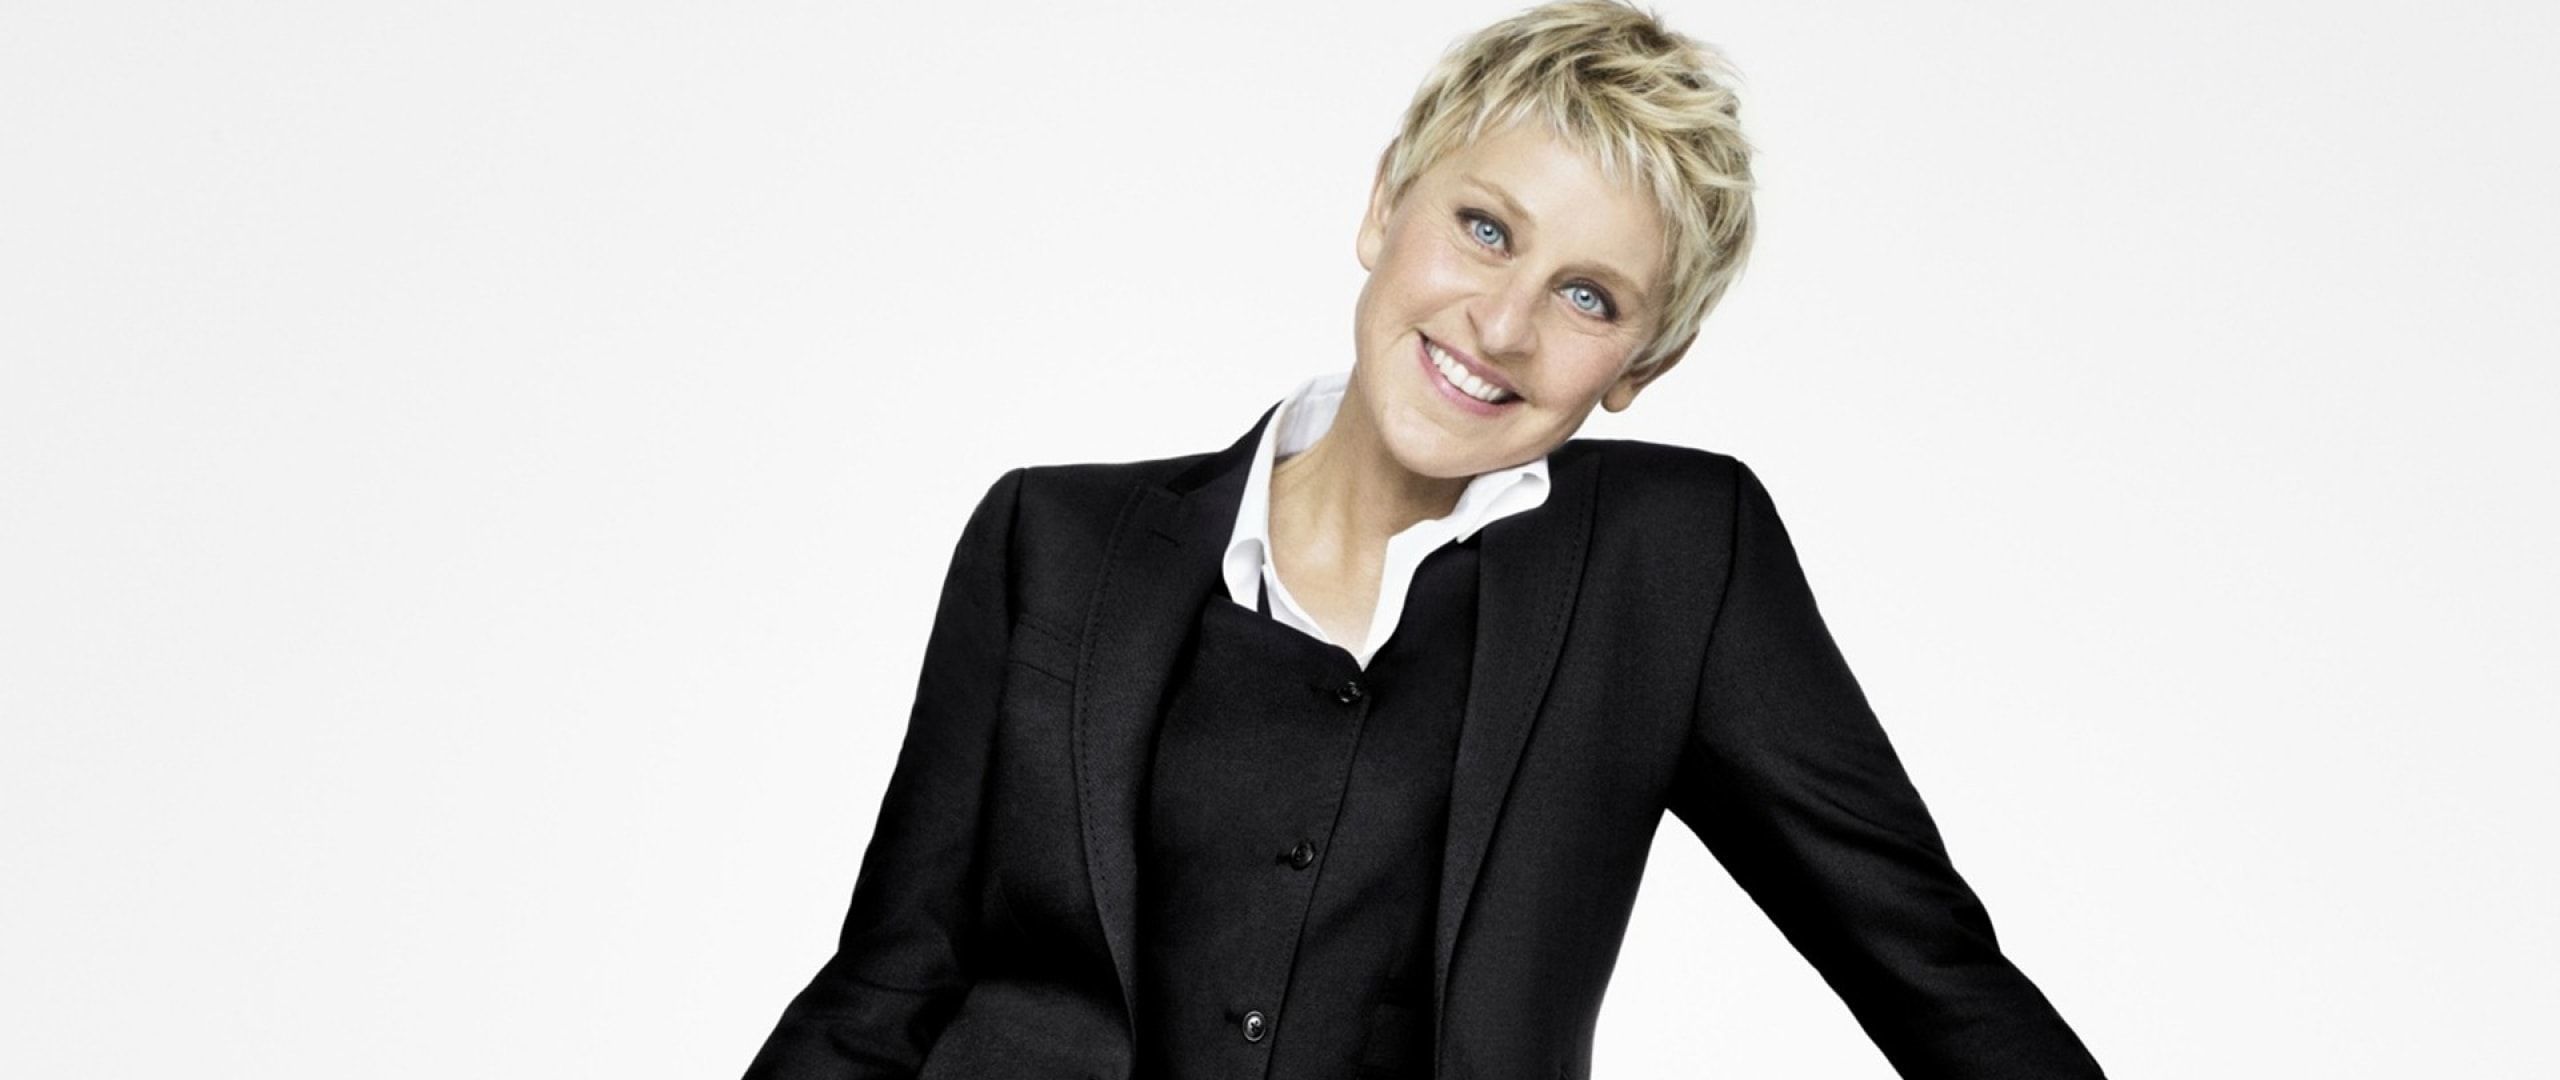 Ellen DeGeneres: A stand-up comedian, An advocate for LGBTQ rights. 2560x1080 Dual Screen Background.